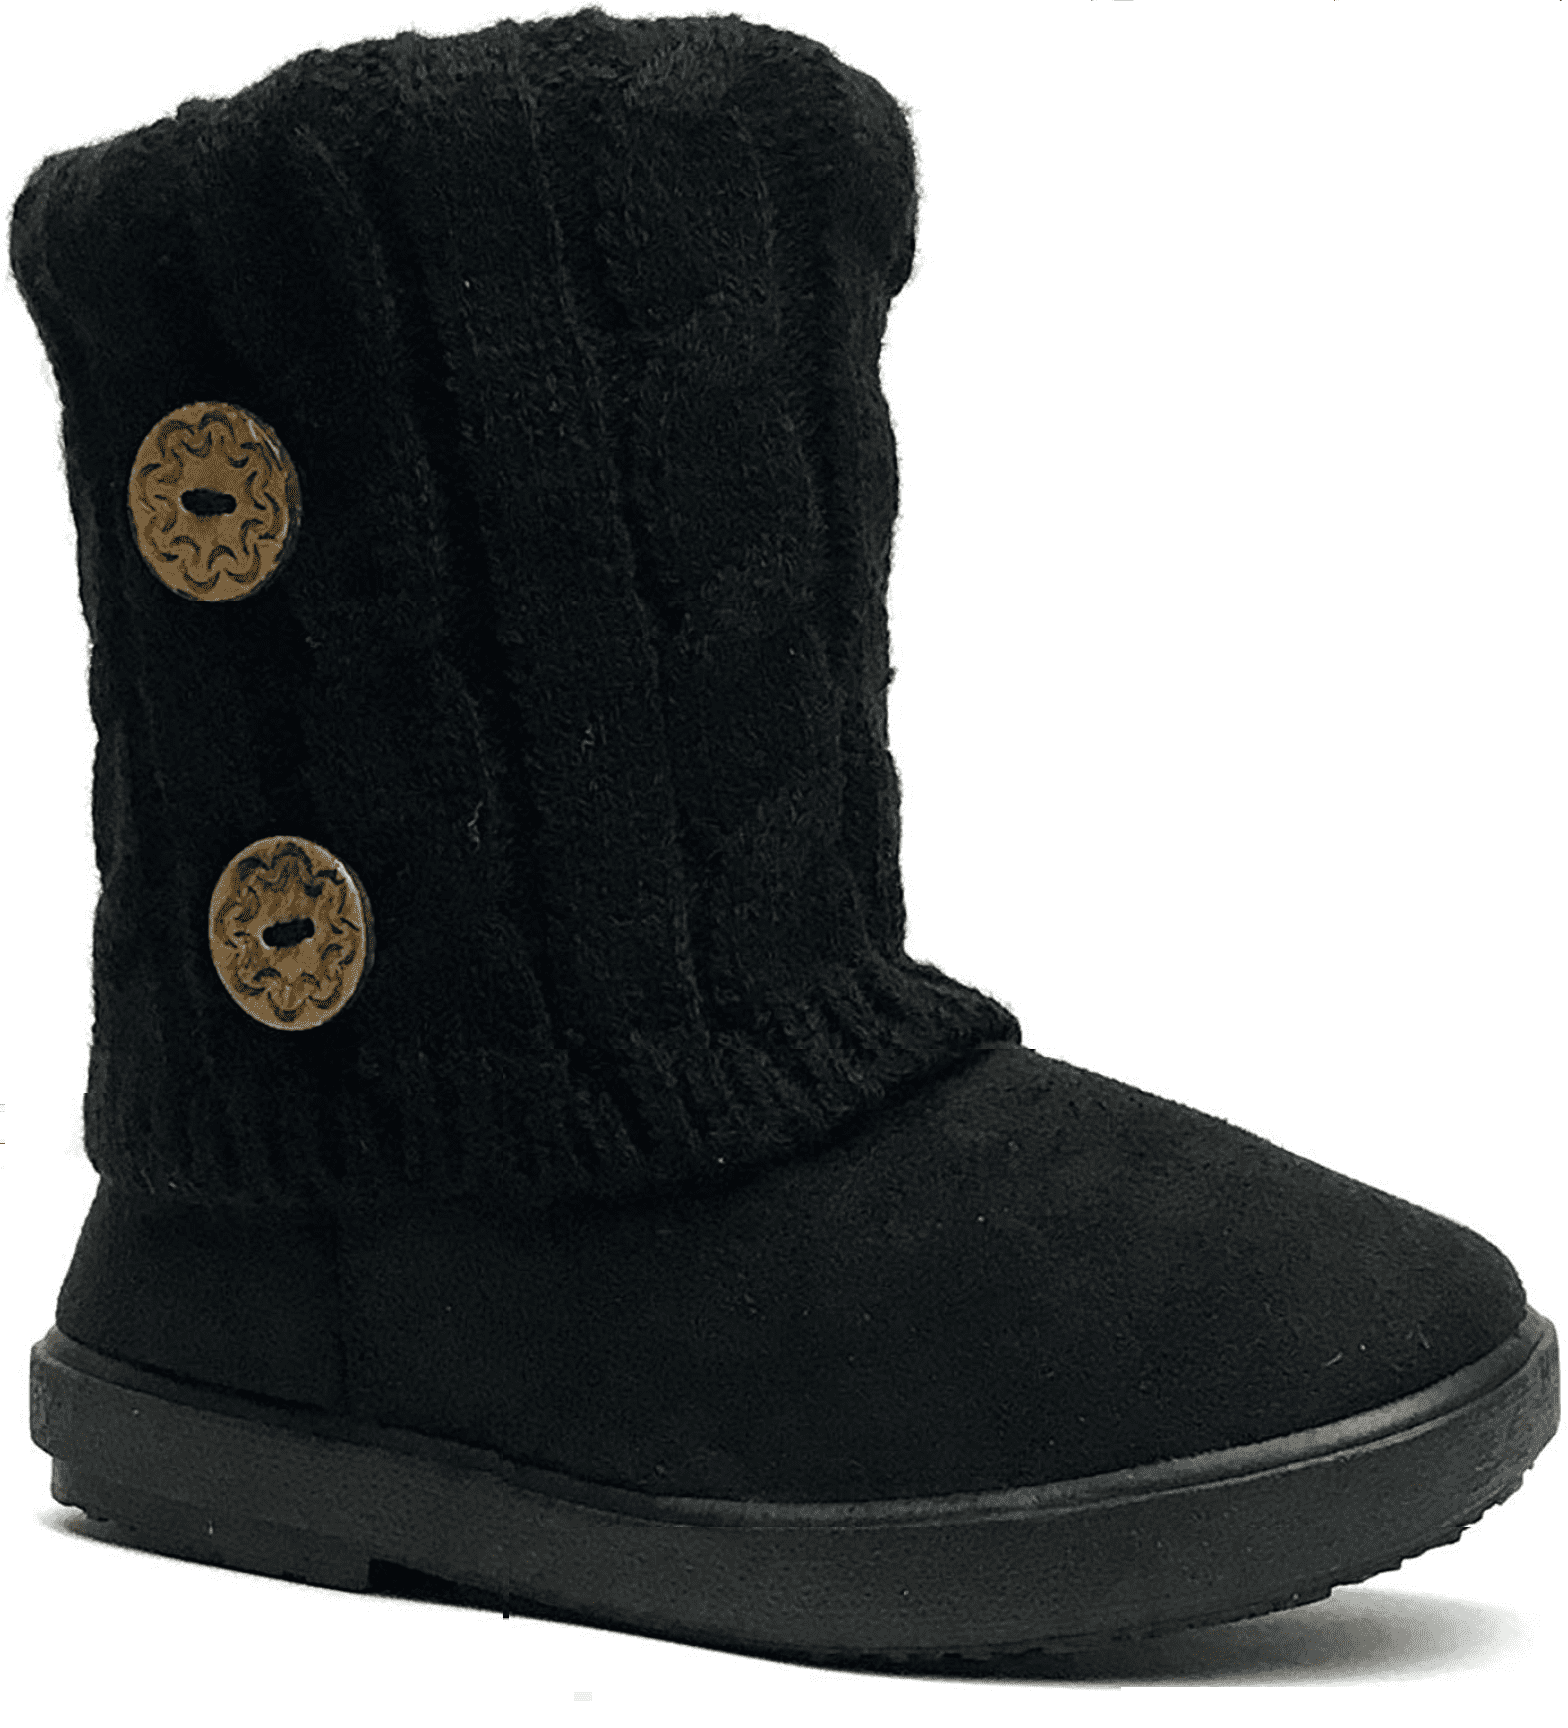 Infant Toddler Girls Winter Casual 